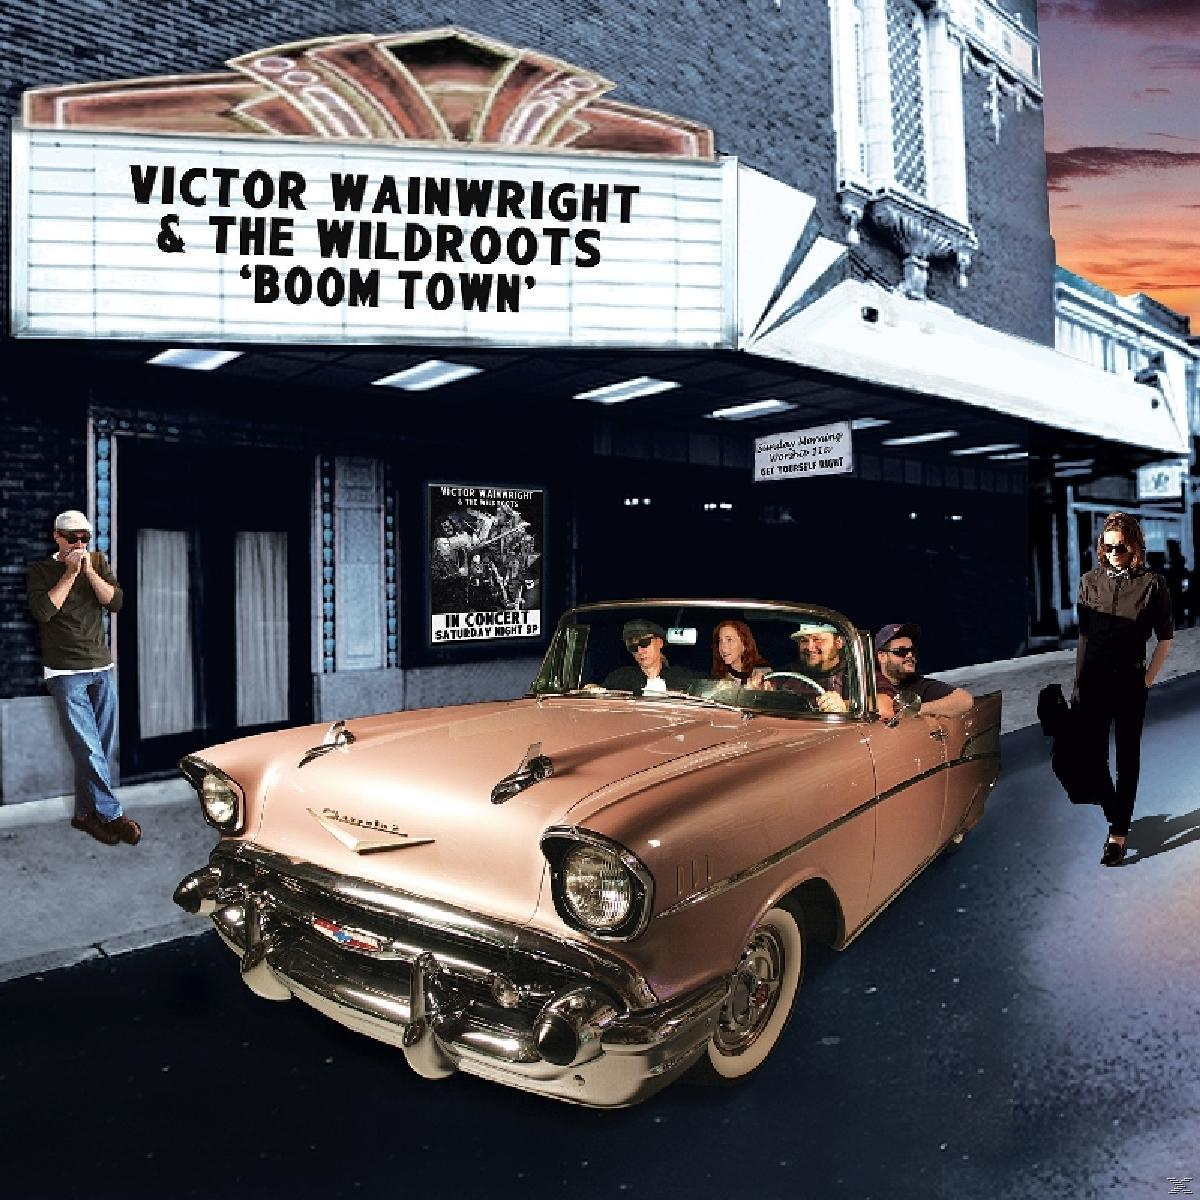 Victor (CD) The Wainwright The - Wildroots, Town Boom & -